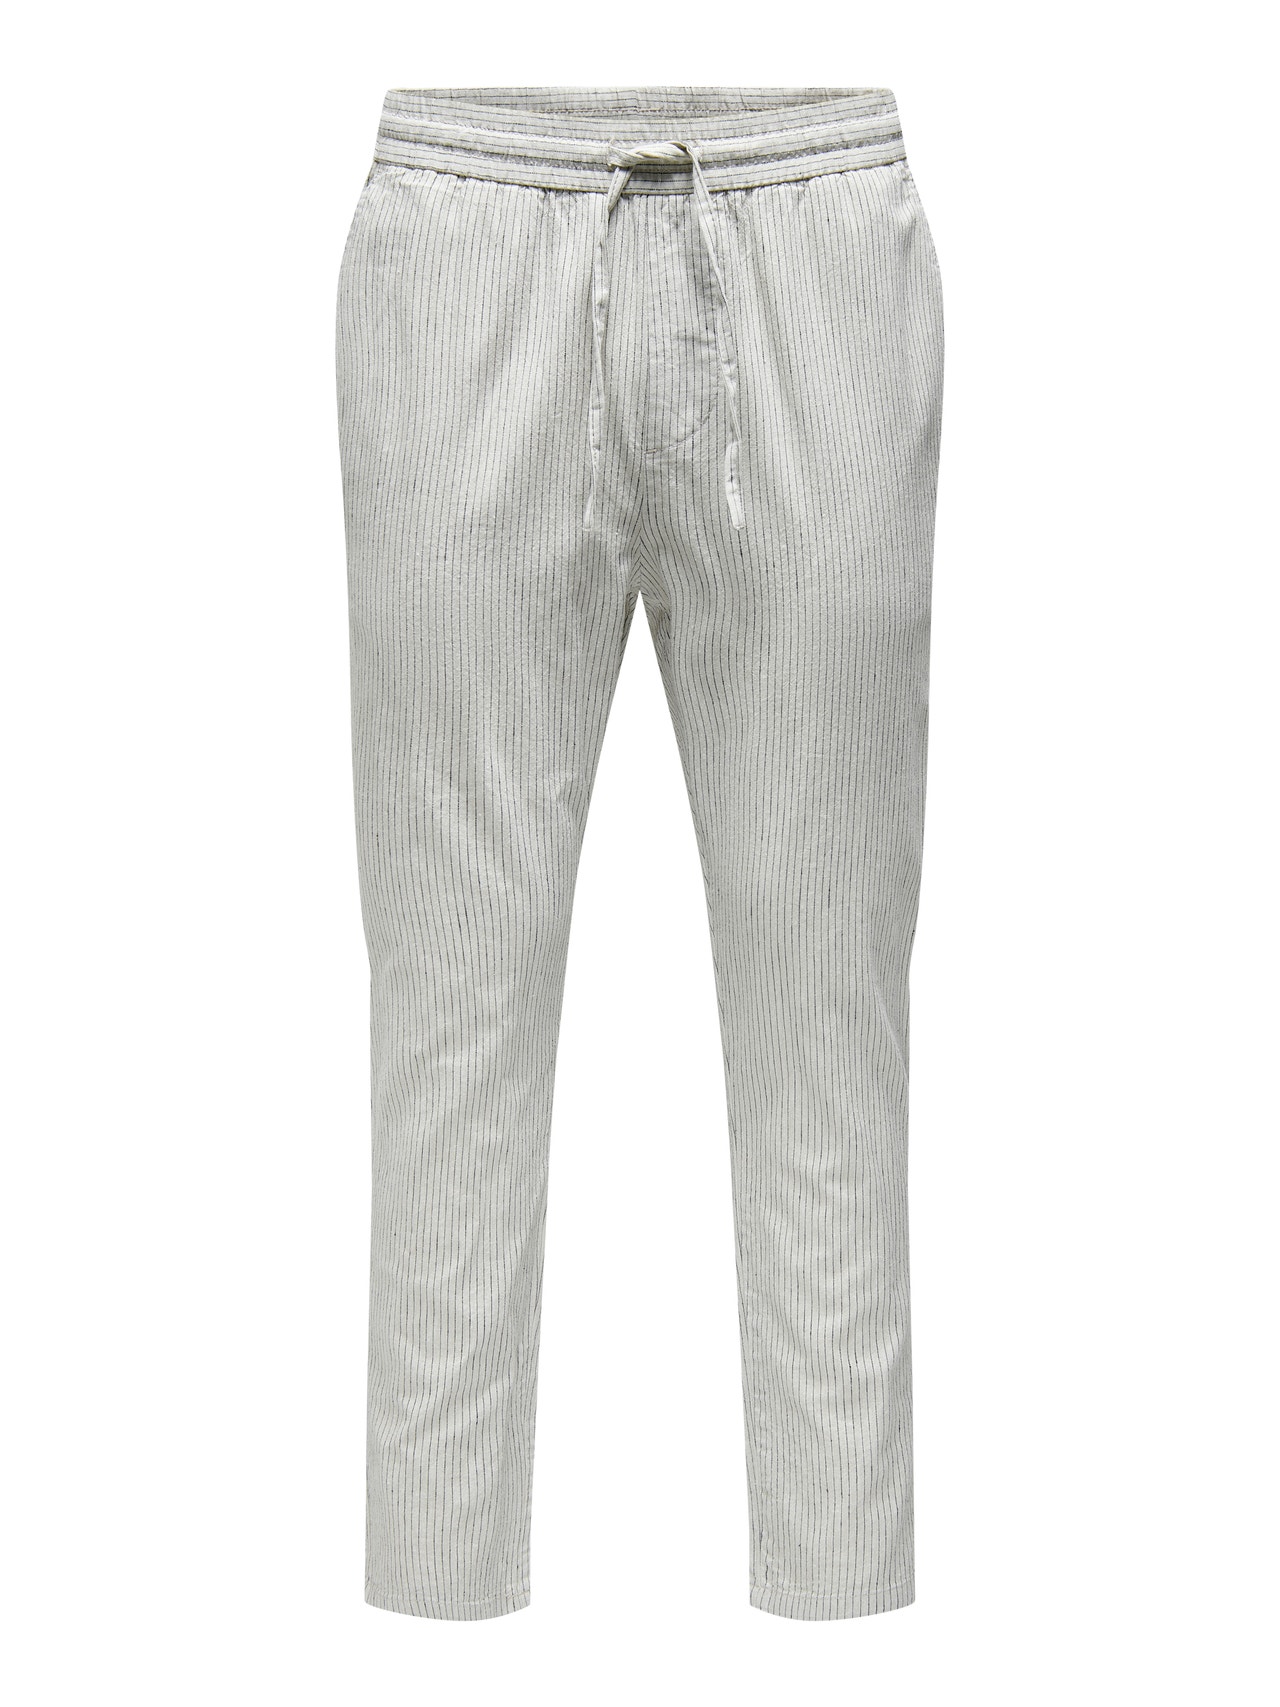 ONLY & SONS Pantalones Corte tapered Talle medio -Moonstruck - 22024949